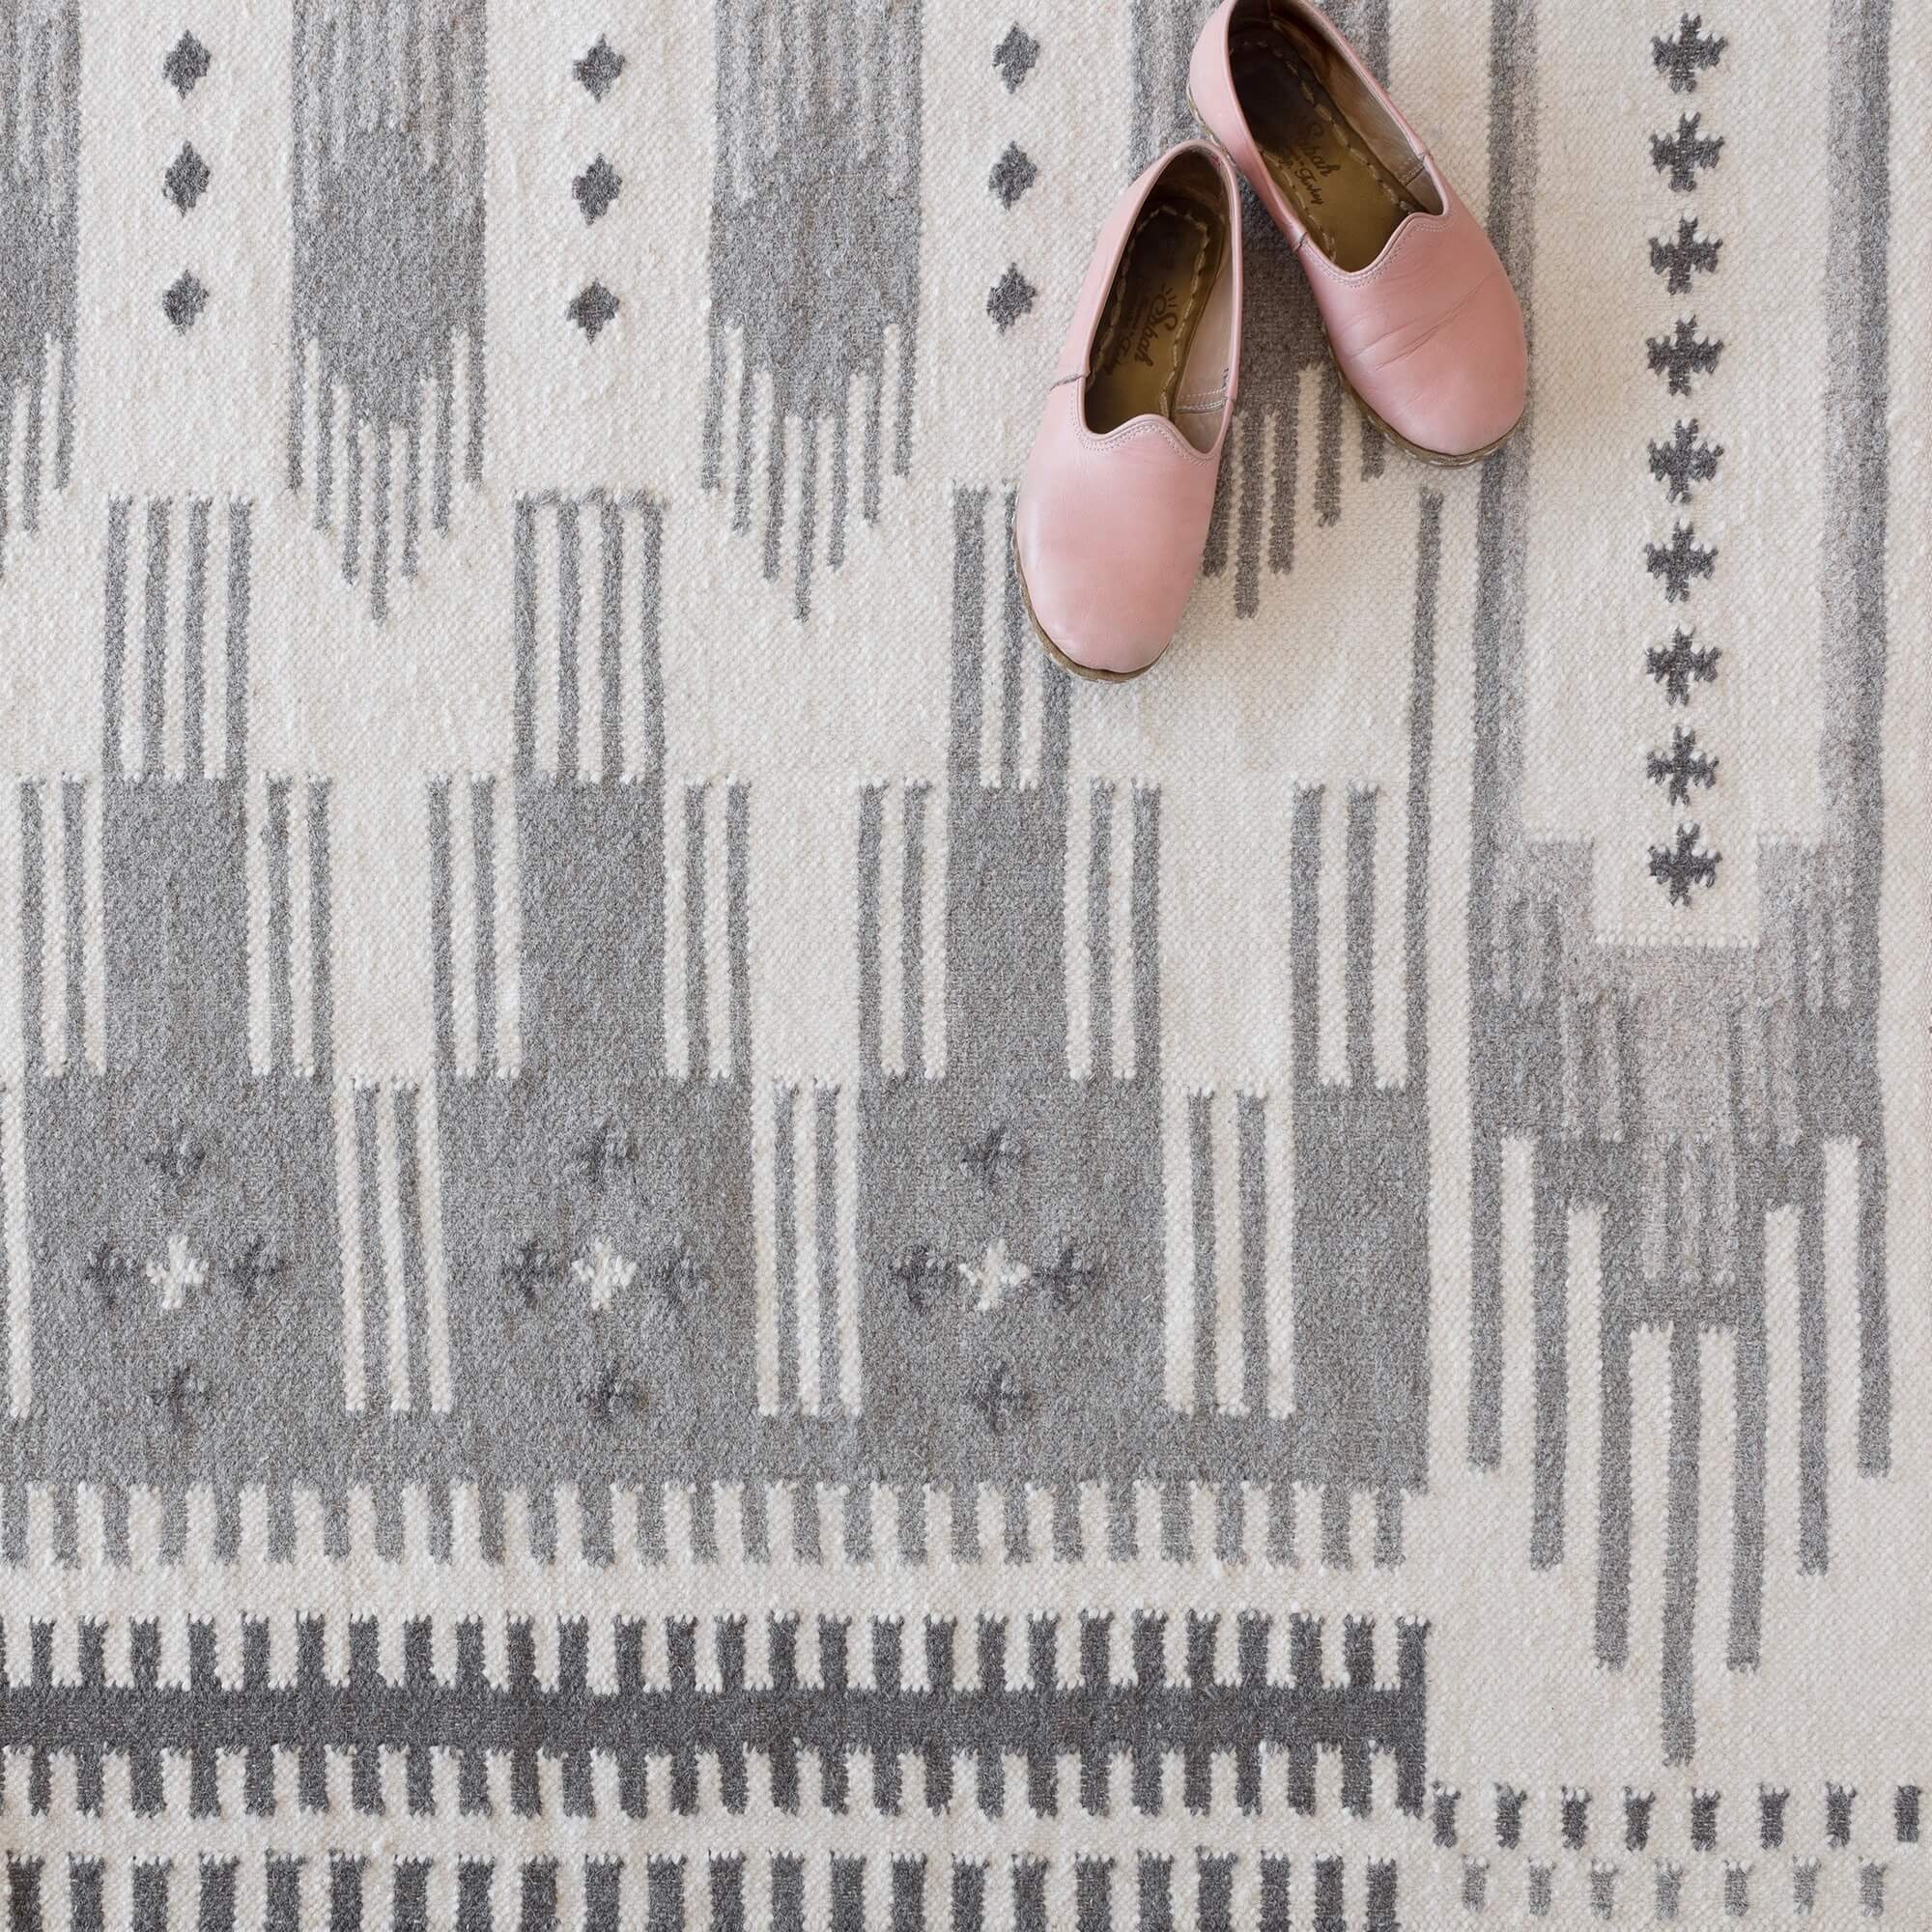 The Citizenry Asha Handwoven Area Rug | 5' x 8' | Grey - Image 5